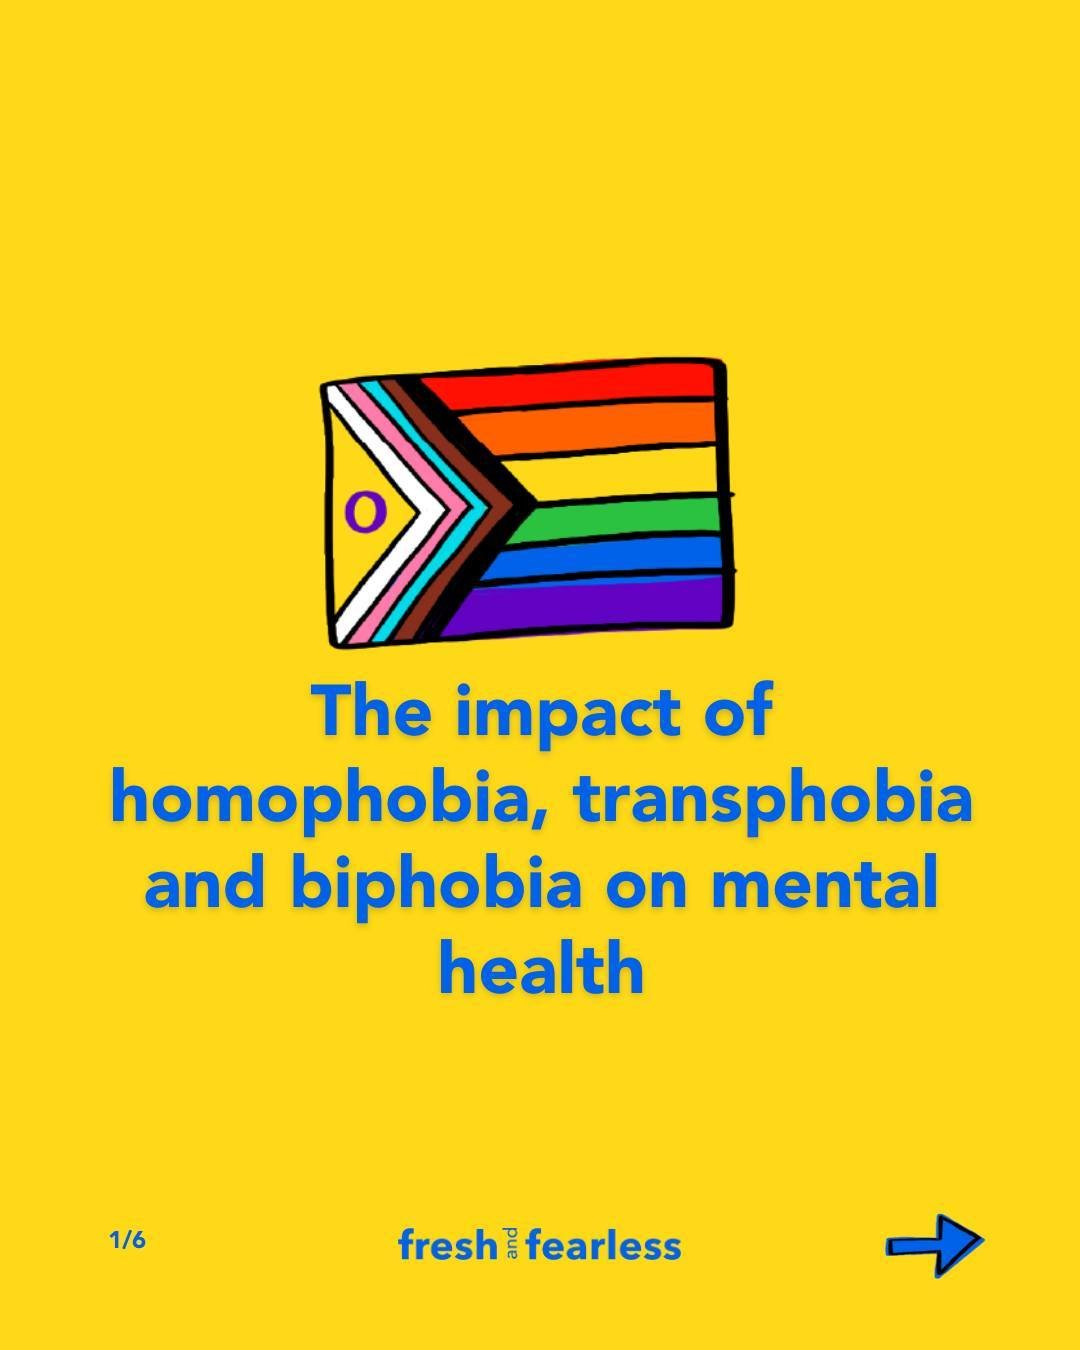 It&rsquo;s Mental Health Awareness Week, and today is also International Day Against Homophobia, Transphobia and Biphobia. So let&rsquo;s talk about both. ⁠
⁠
From violence and discrimination to inadequate access to healthcare, homophobia, transphobi